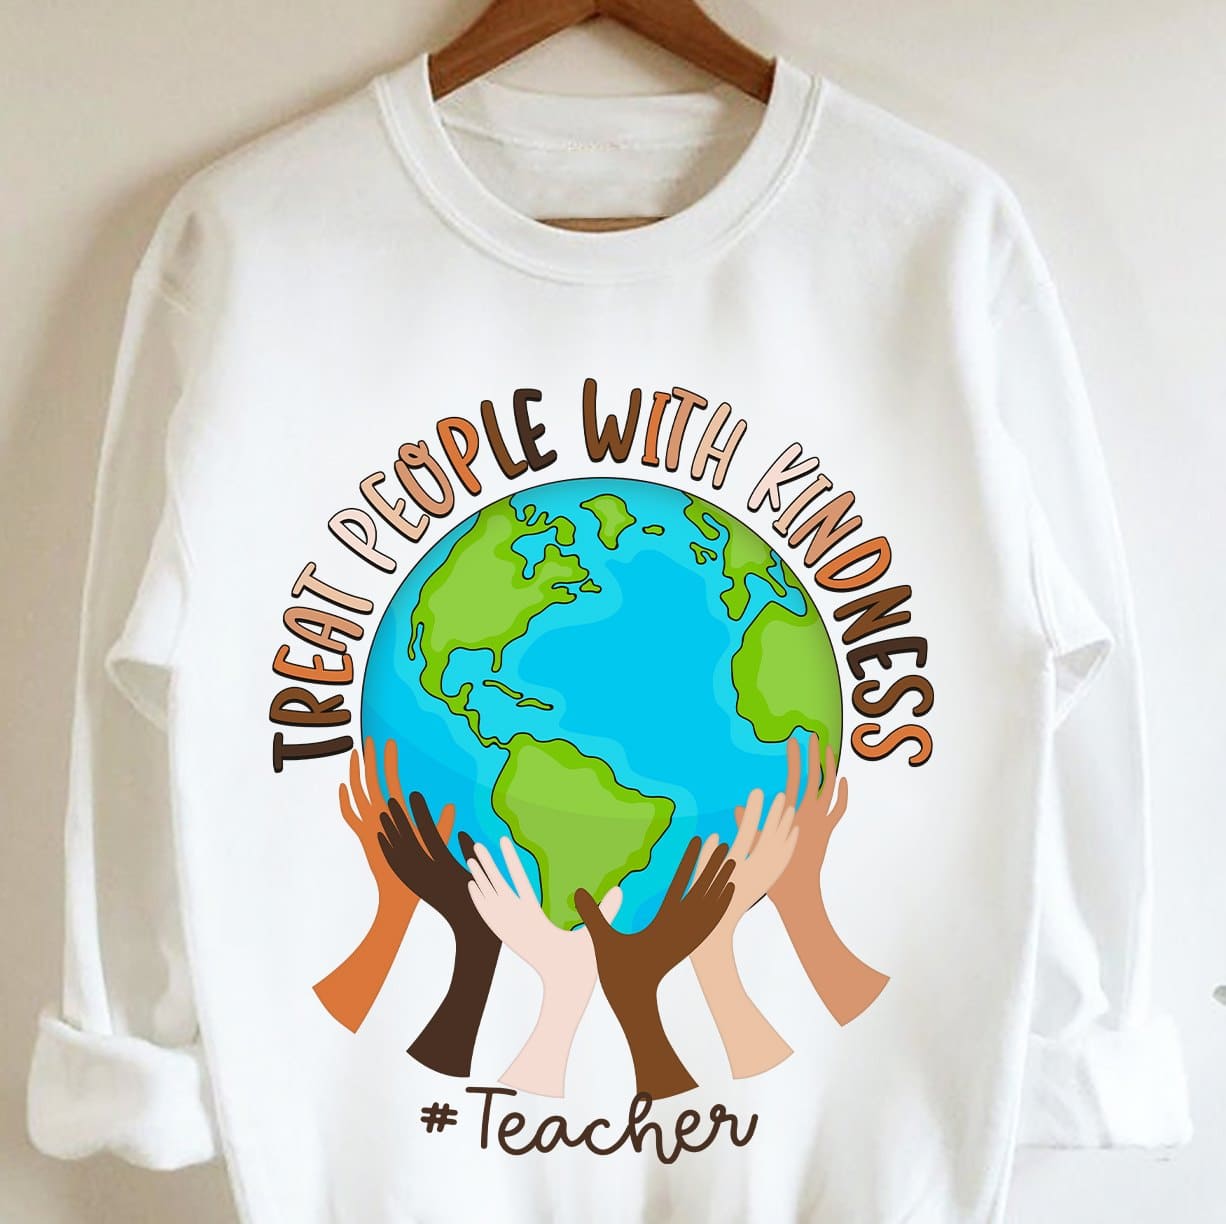 Treat people with kindness - Teacher gift T-shirt, respect for everyone